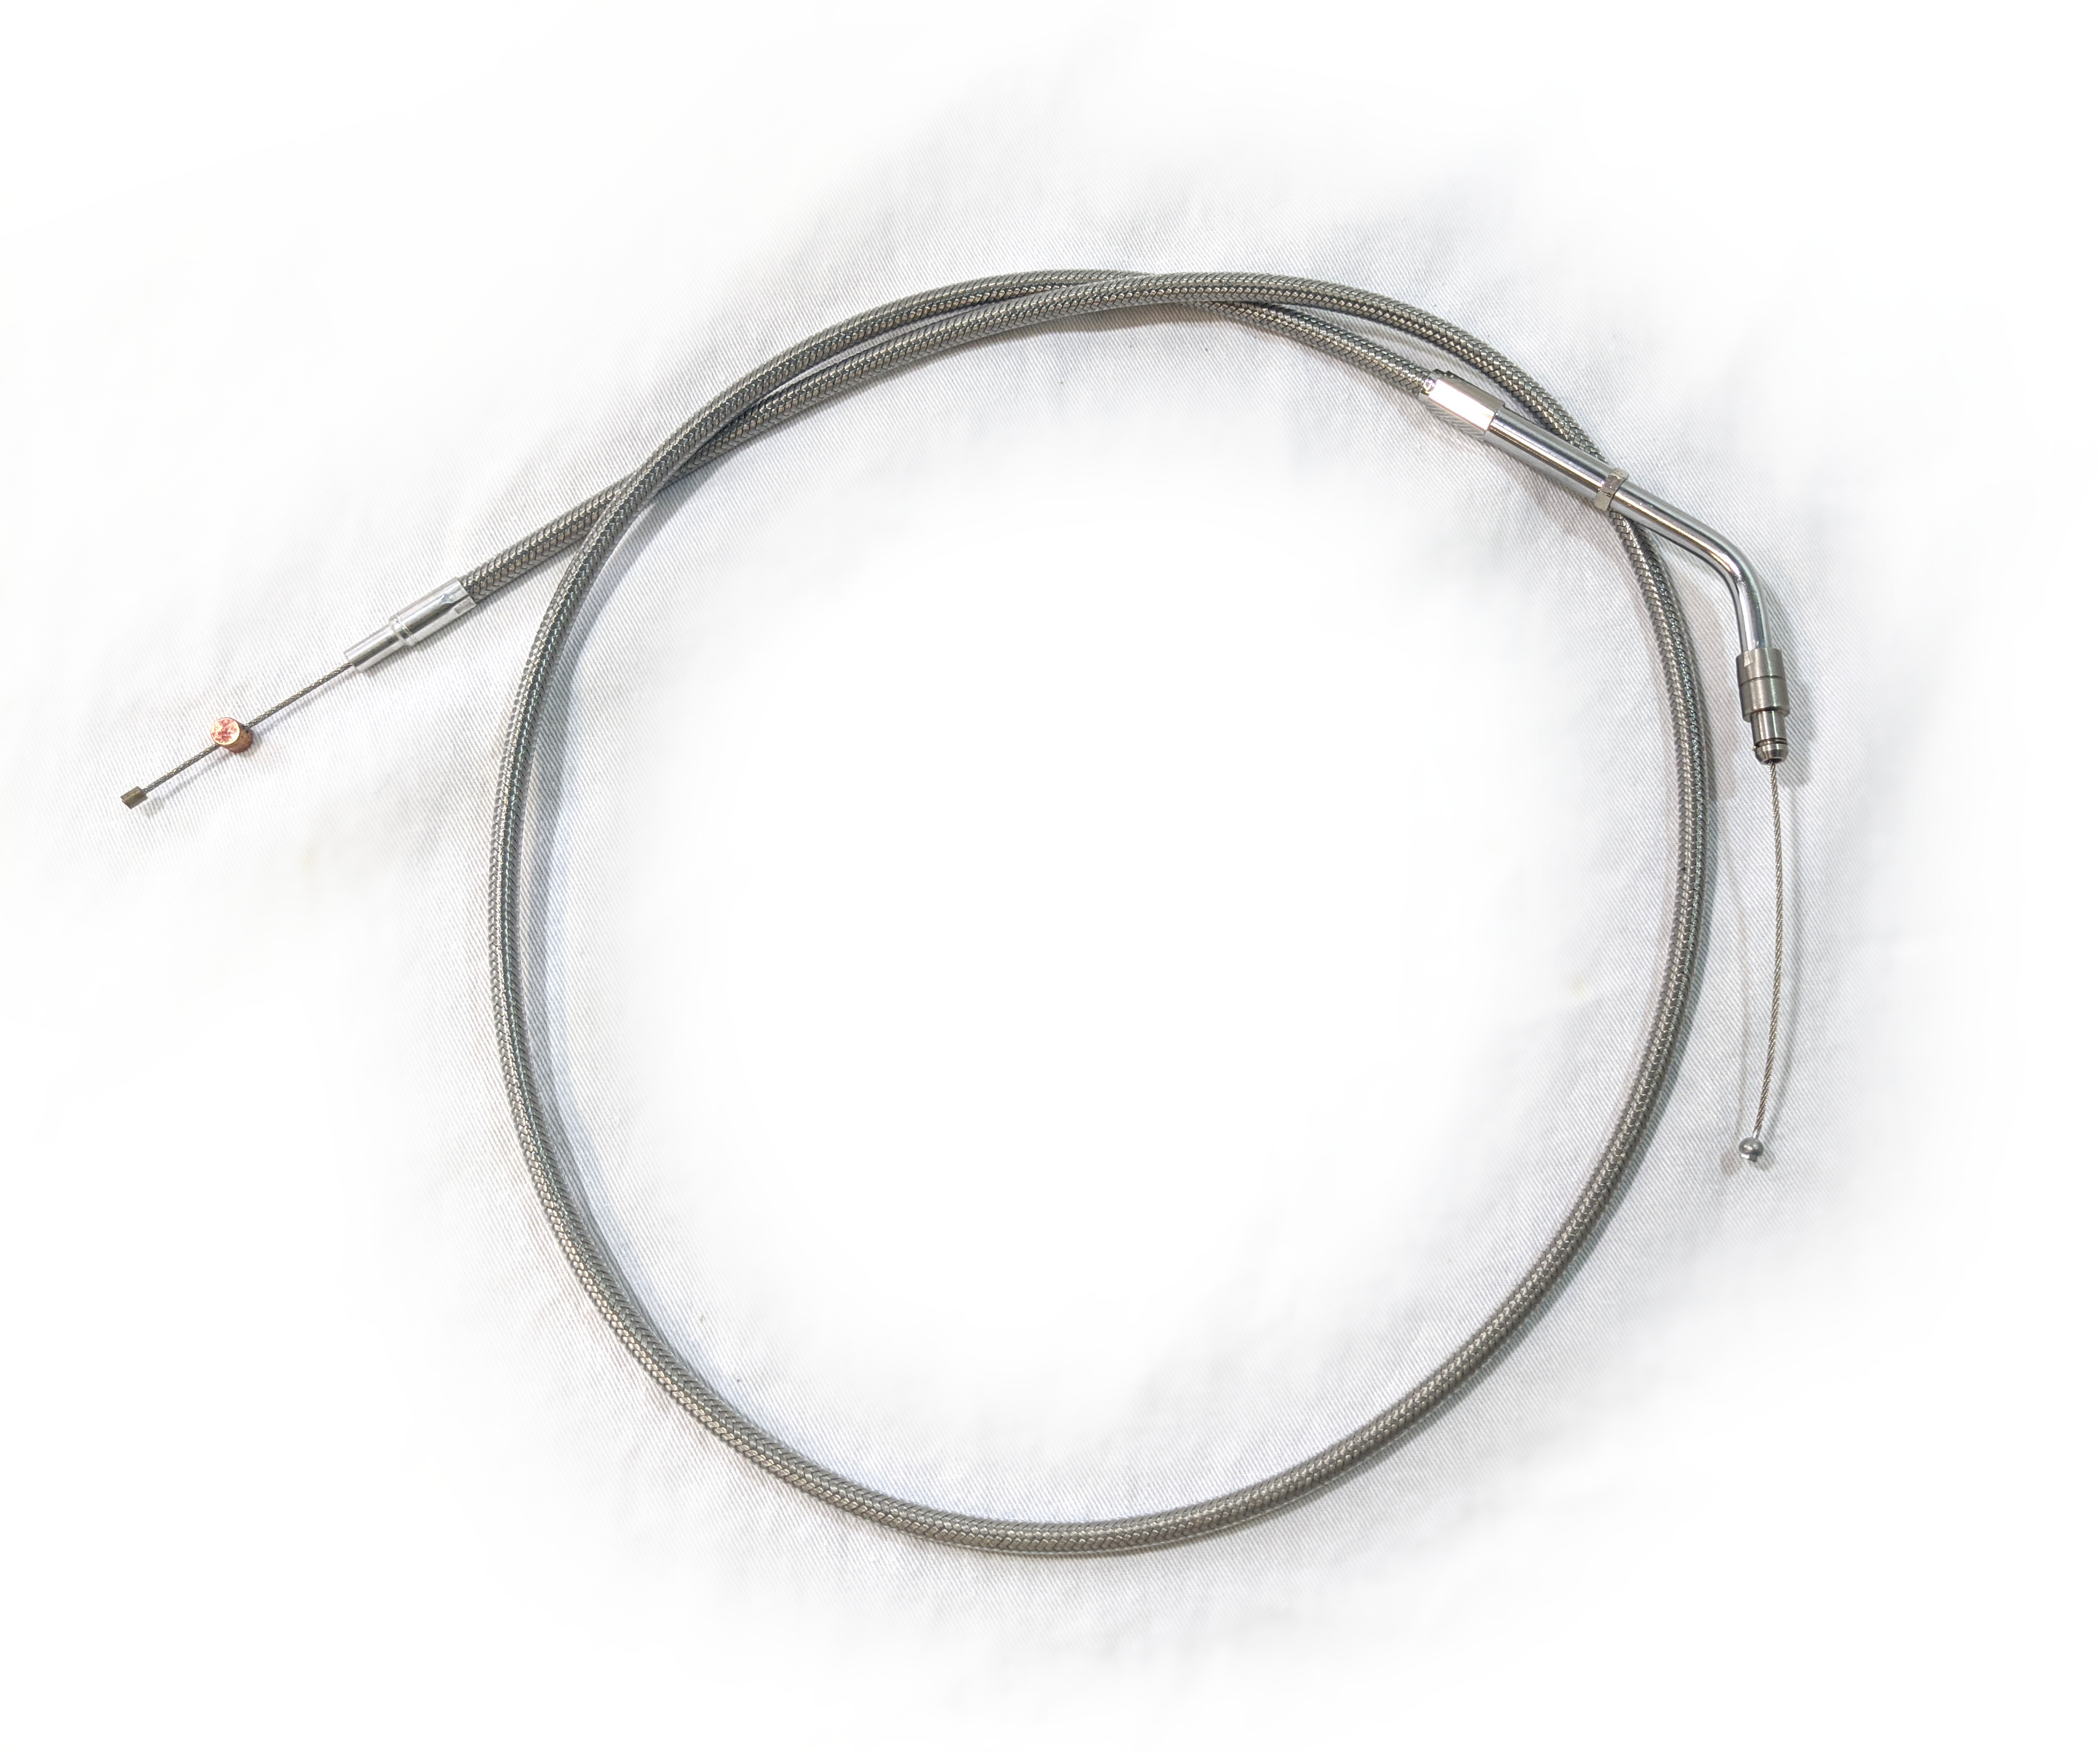 +8" Braided Stainless Steel Throttle Cable - 8" Longer Than Harley 56308-96 - Click Image to Close